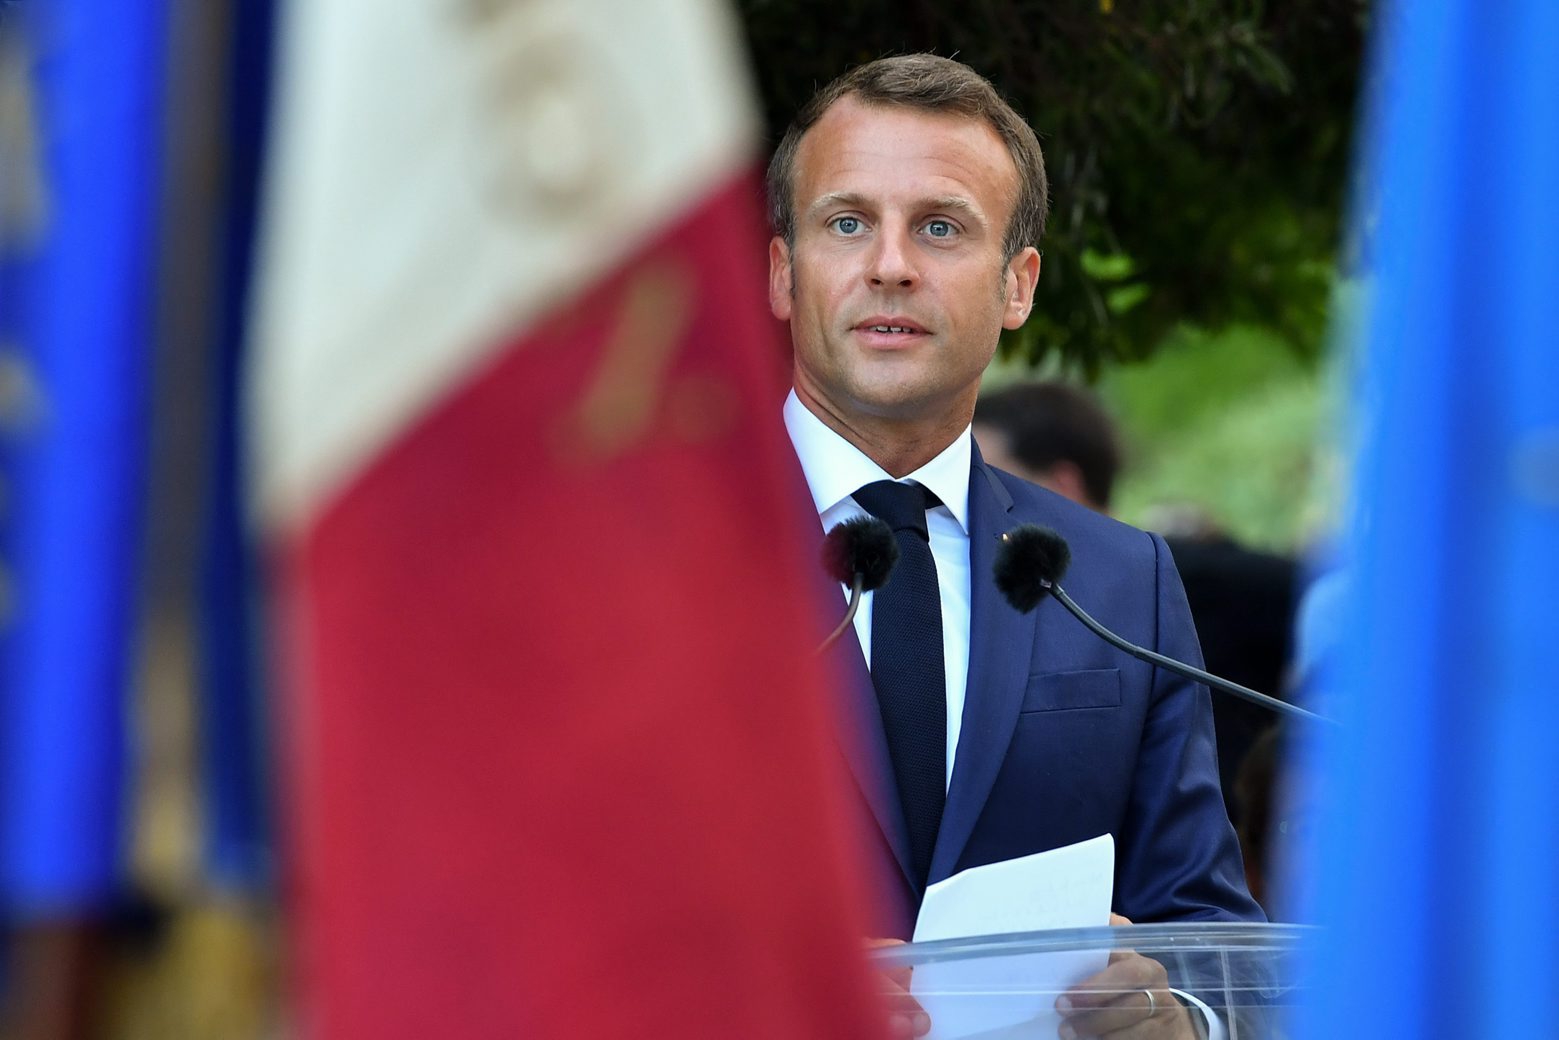 epa07778292 French President Emmanuel Macron delivers a speech during a ceremony marking the 75th anniversary of the Allied landings in Provence in World War II which helped liberate southern France, in Bormes-les-Mimosas, France, 17 August 2019.  EPA/YANN COATSALIOU / POOL  MAXPPP OUT FRANCE HISTORY WWII PROVENCE ANNIVERSARY